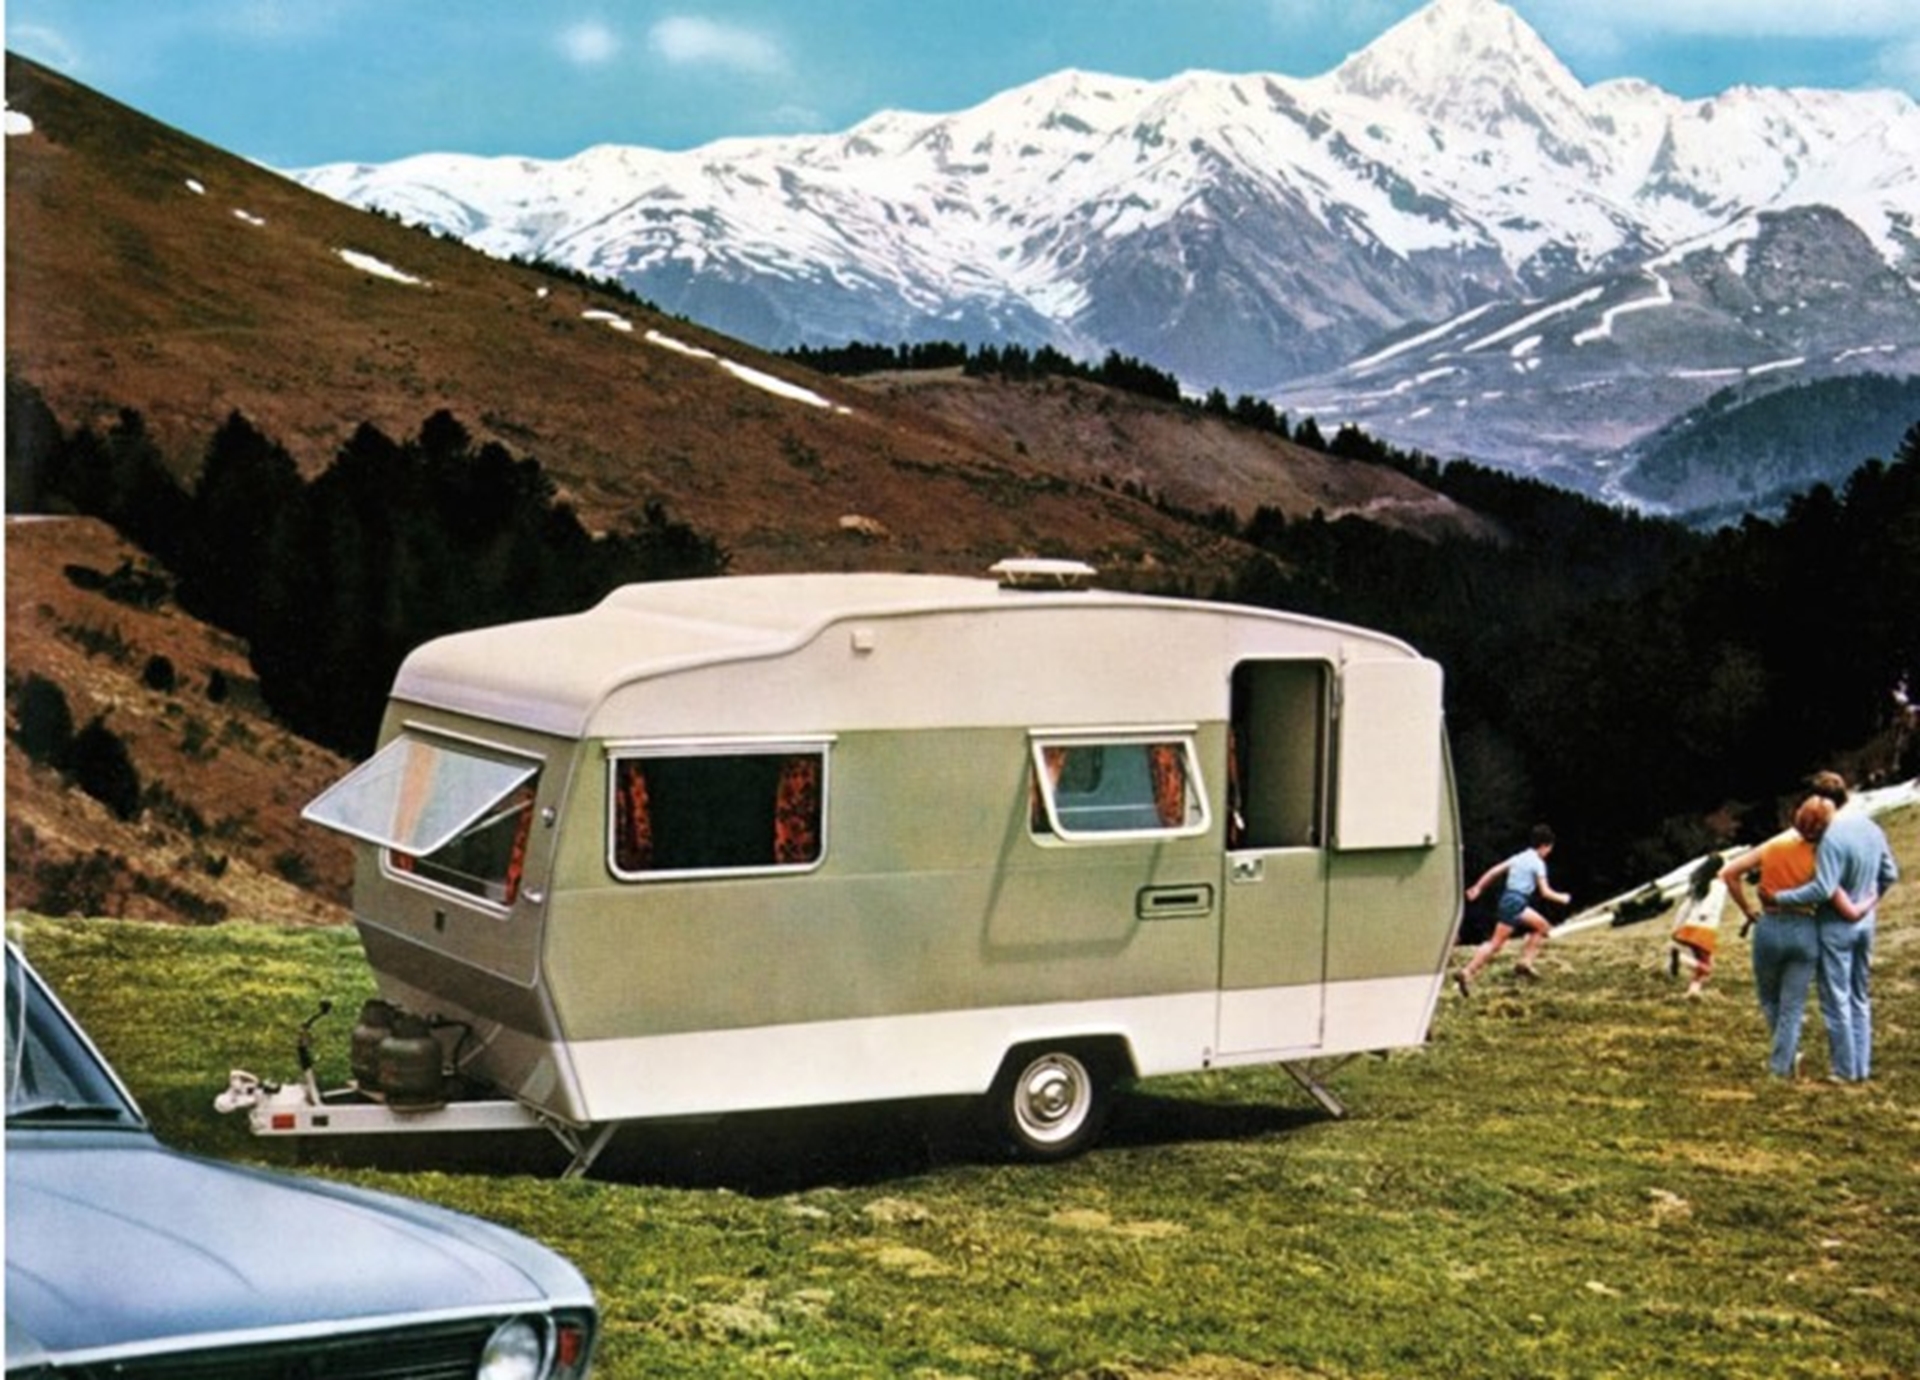 It tells how the Sprite brand mastered massproduction in caravans and